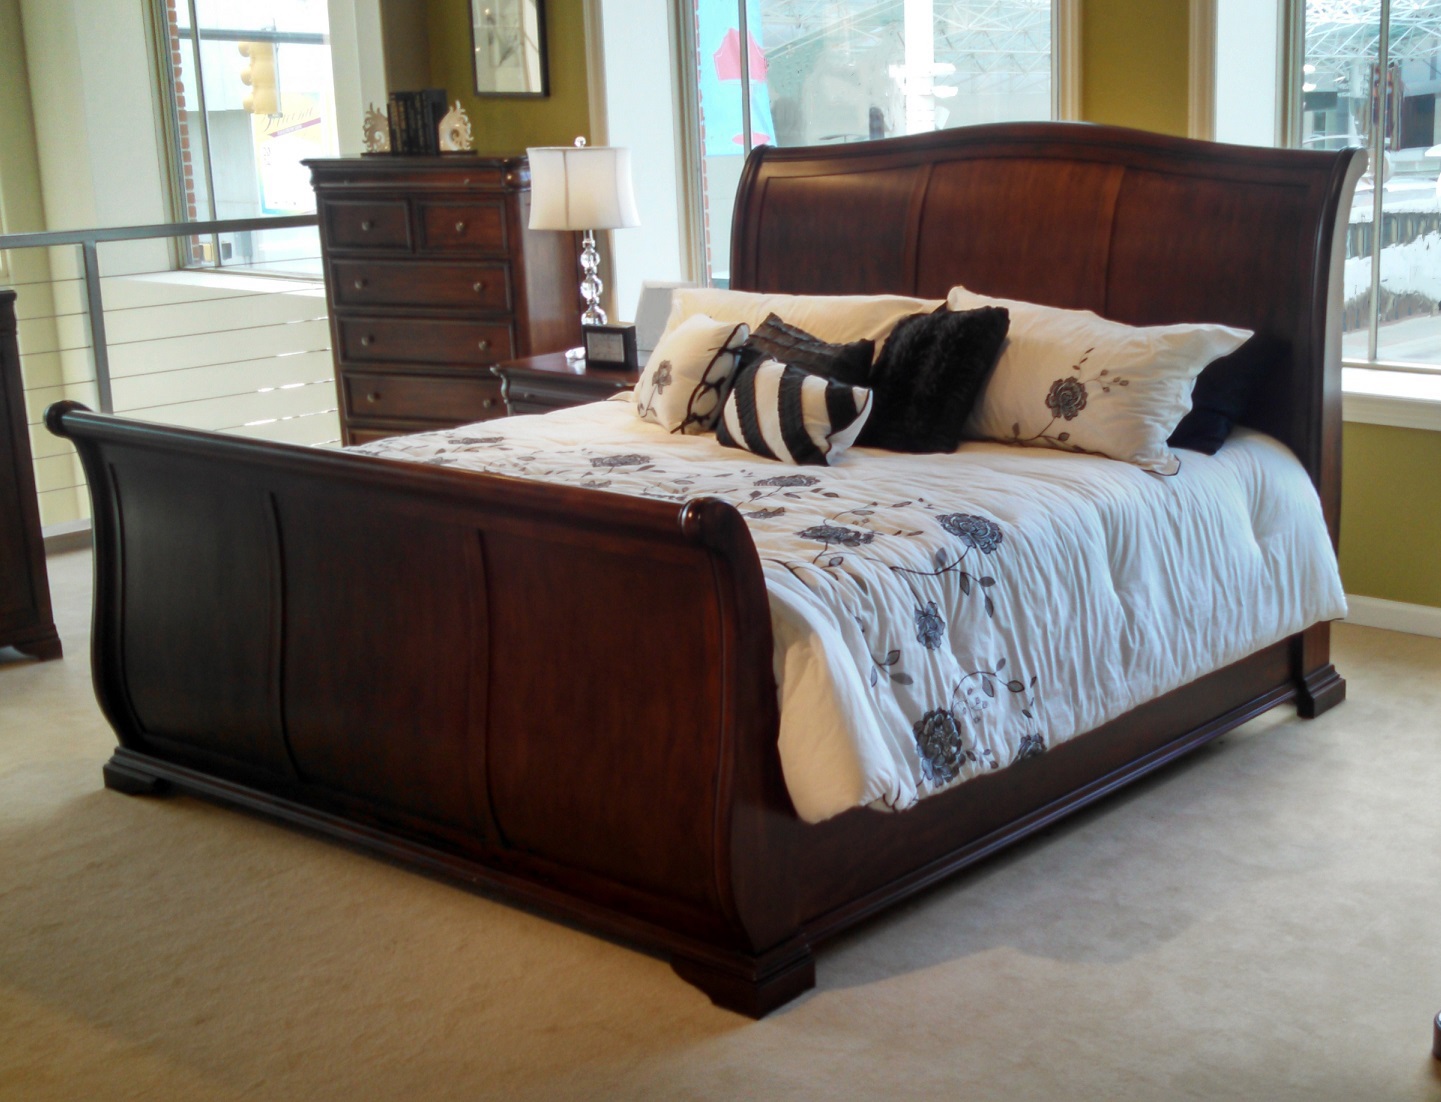 Bedroom Category Beds Images